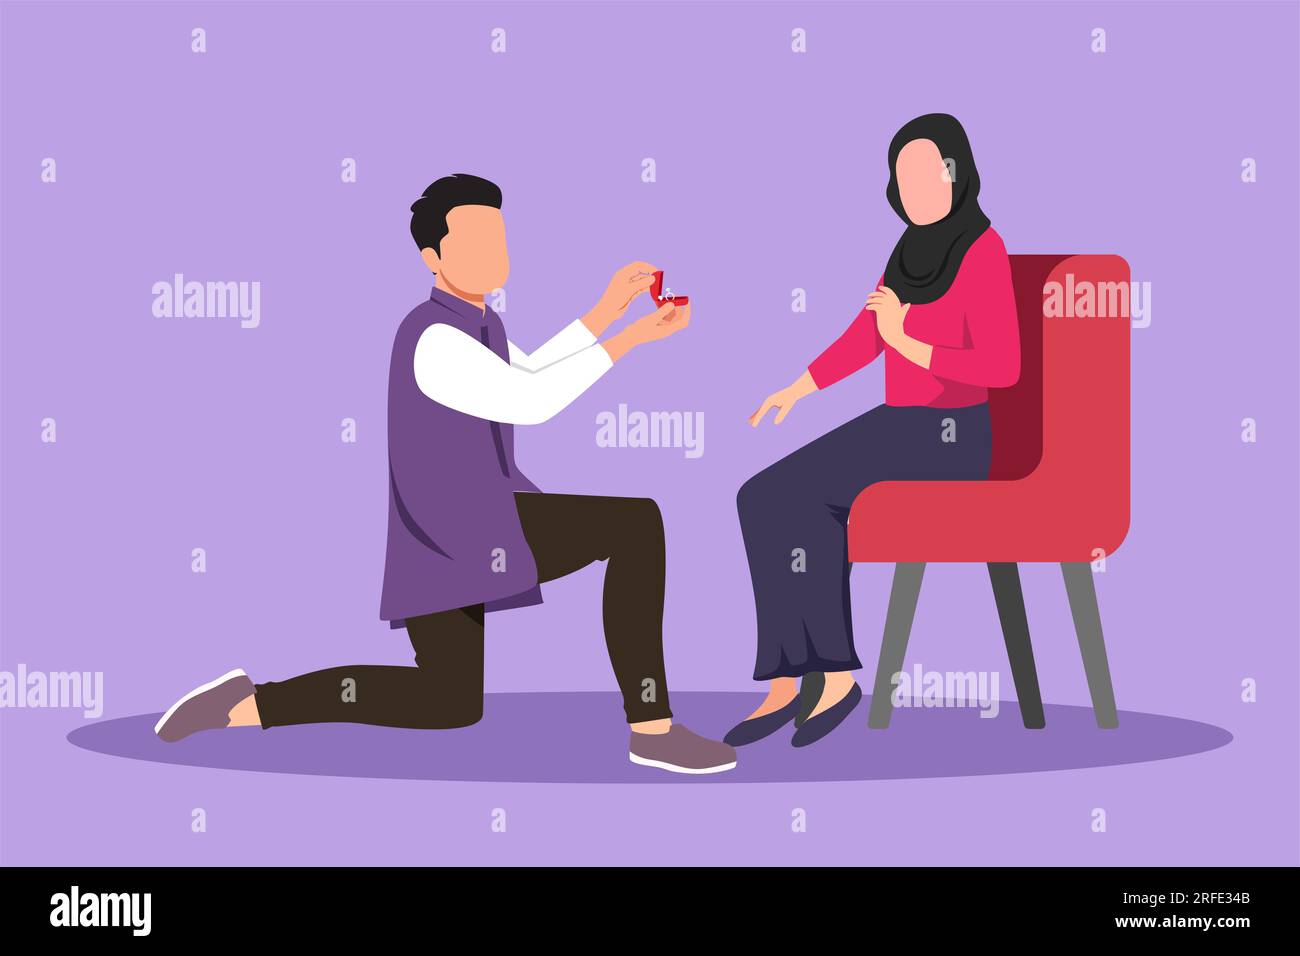 Graphic flat design drawing happy Arab man proposes to woman sitting on chair and gives ring. Couple getting ready for wedding. Bride and groom celebr Stock Photo